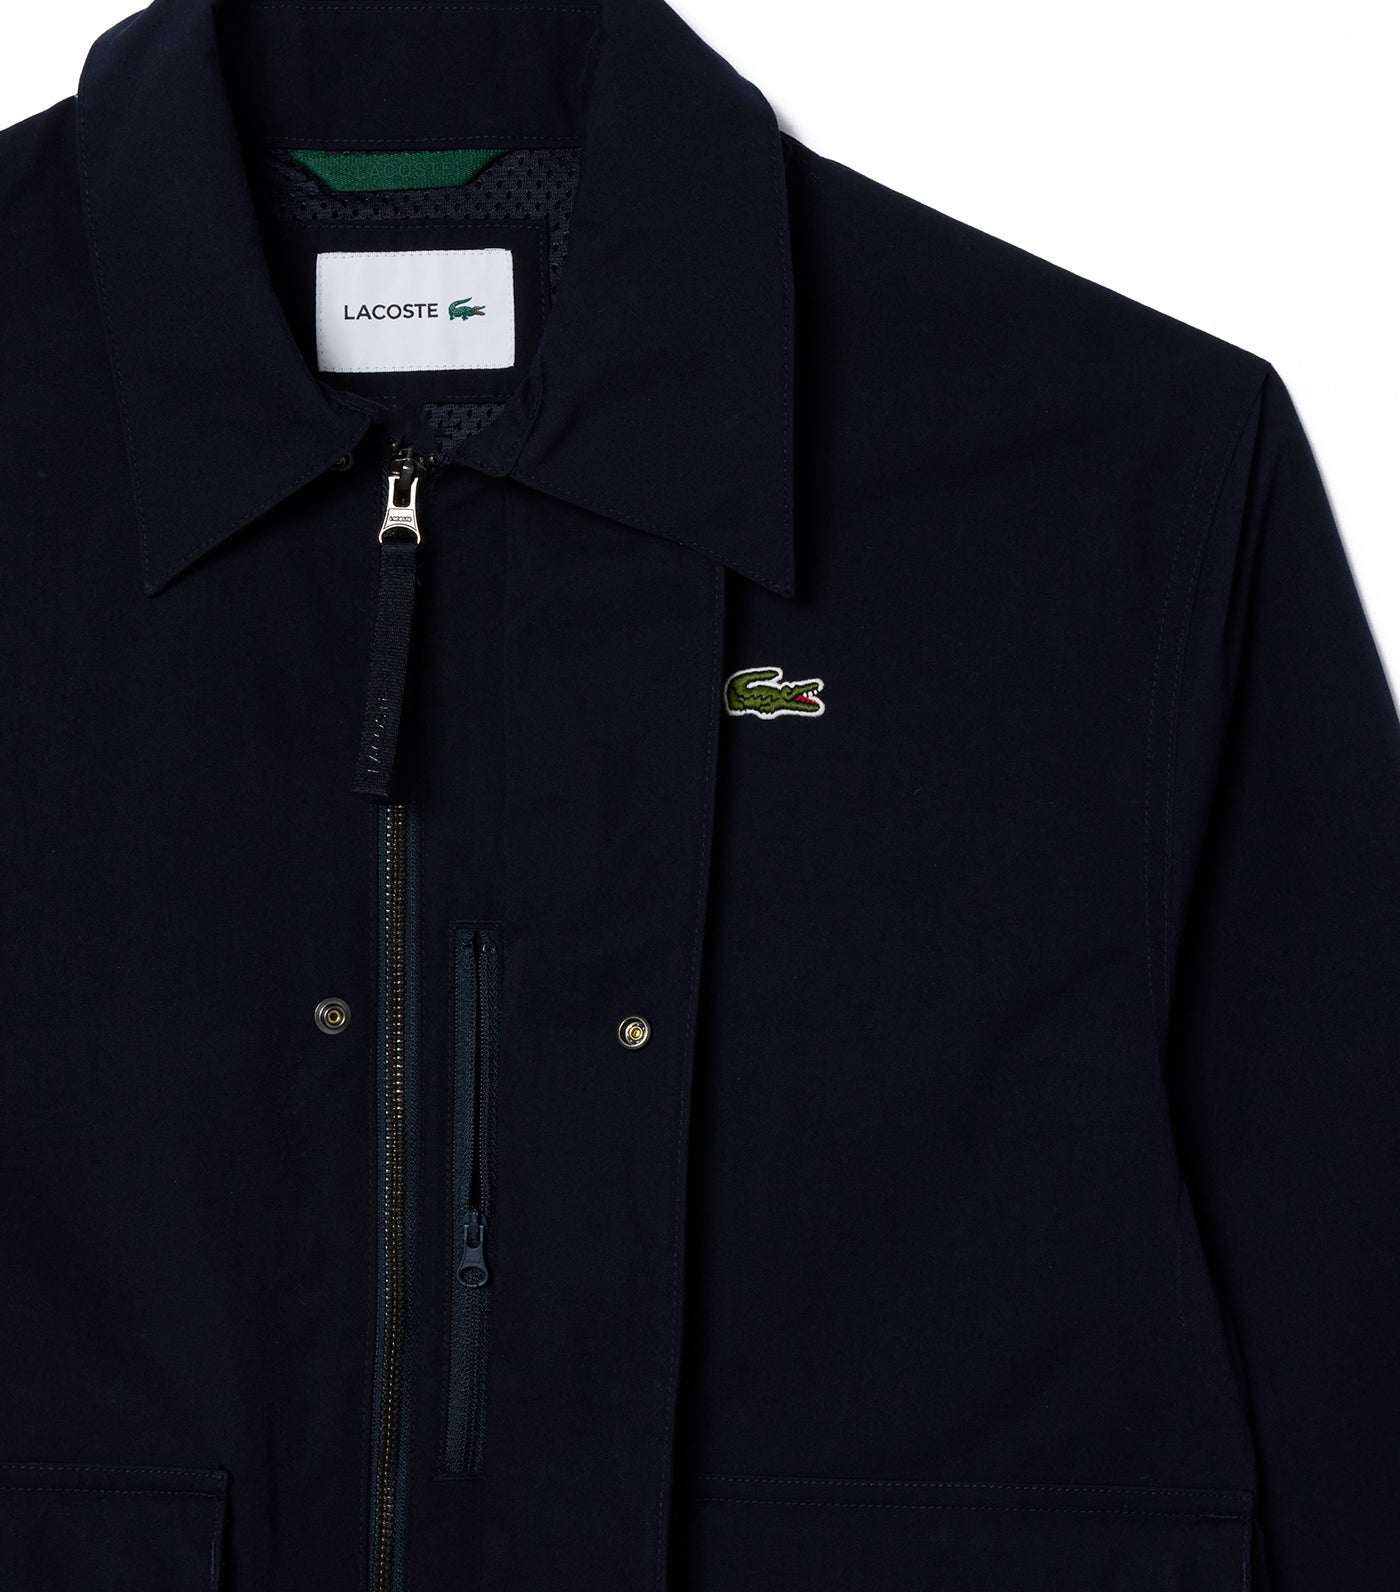 Lacoste Shirt Collar Functional Outerwear Abysm